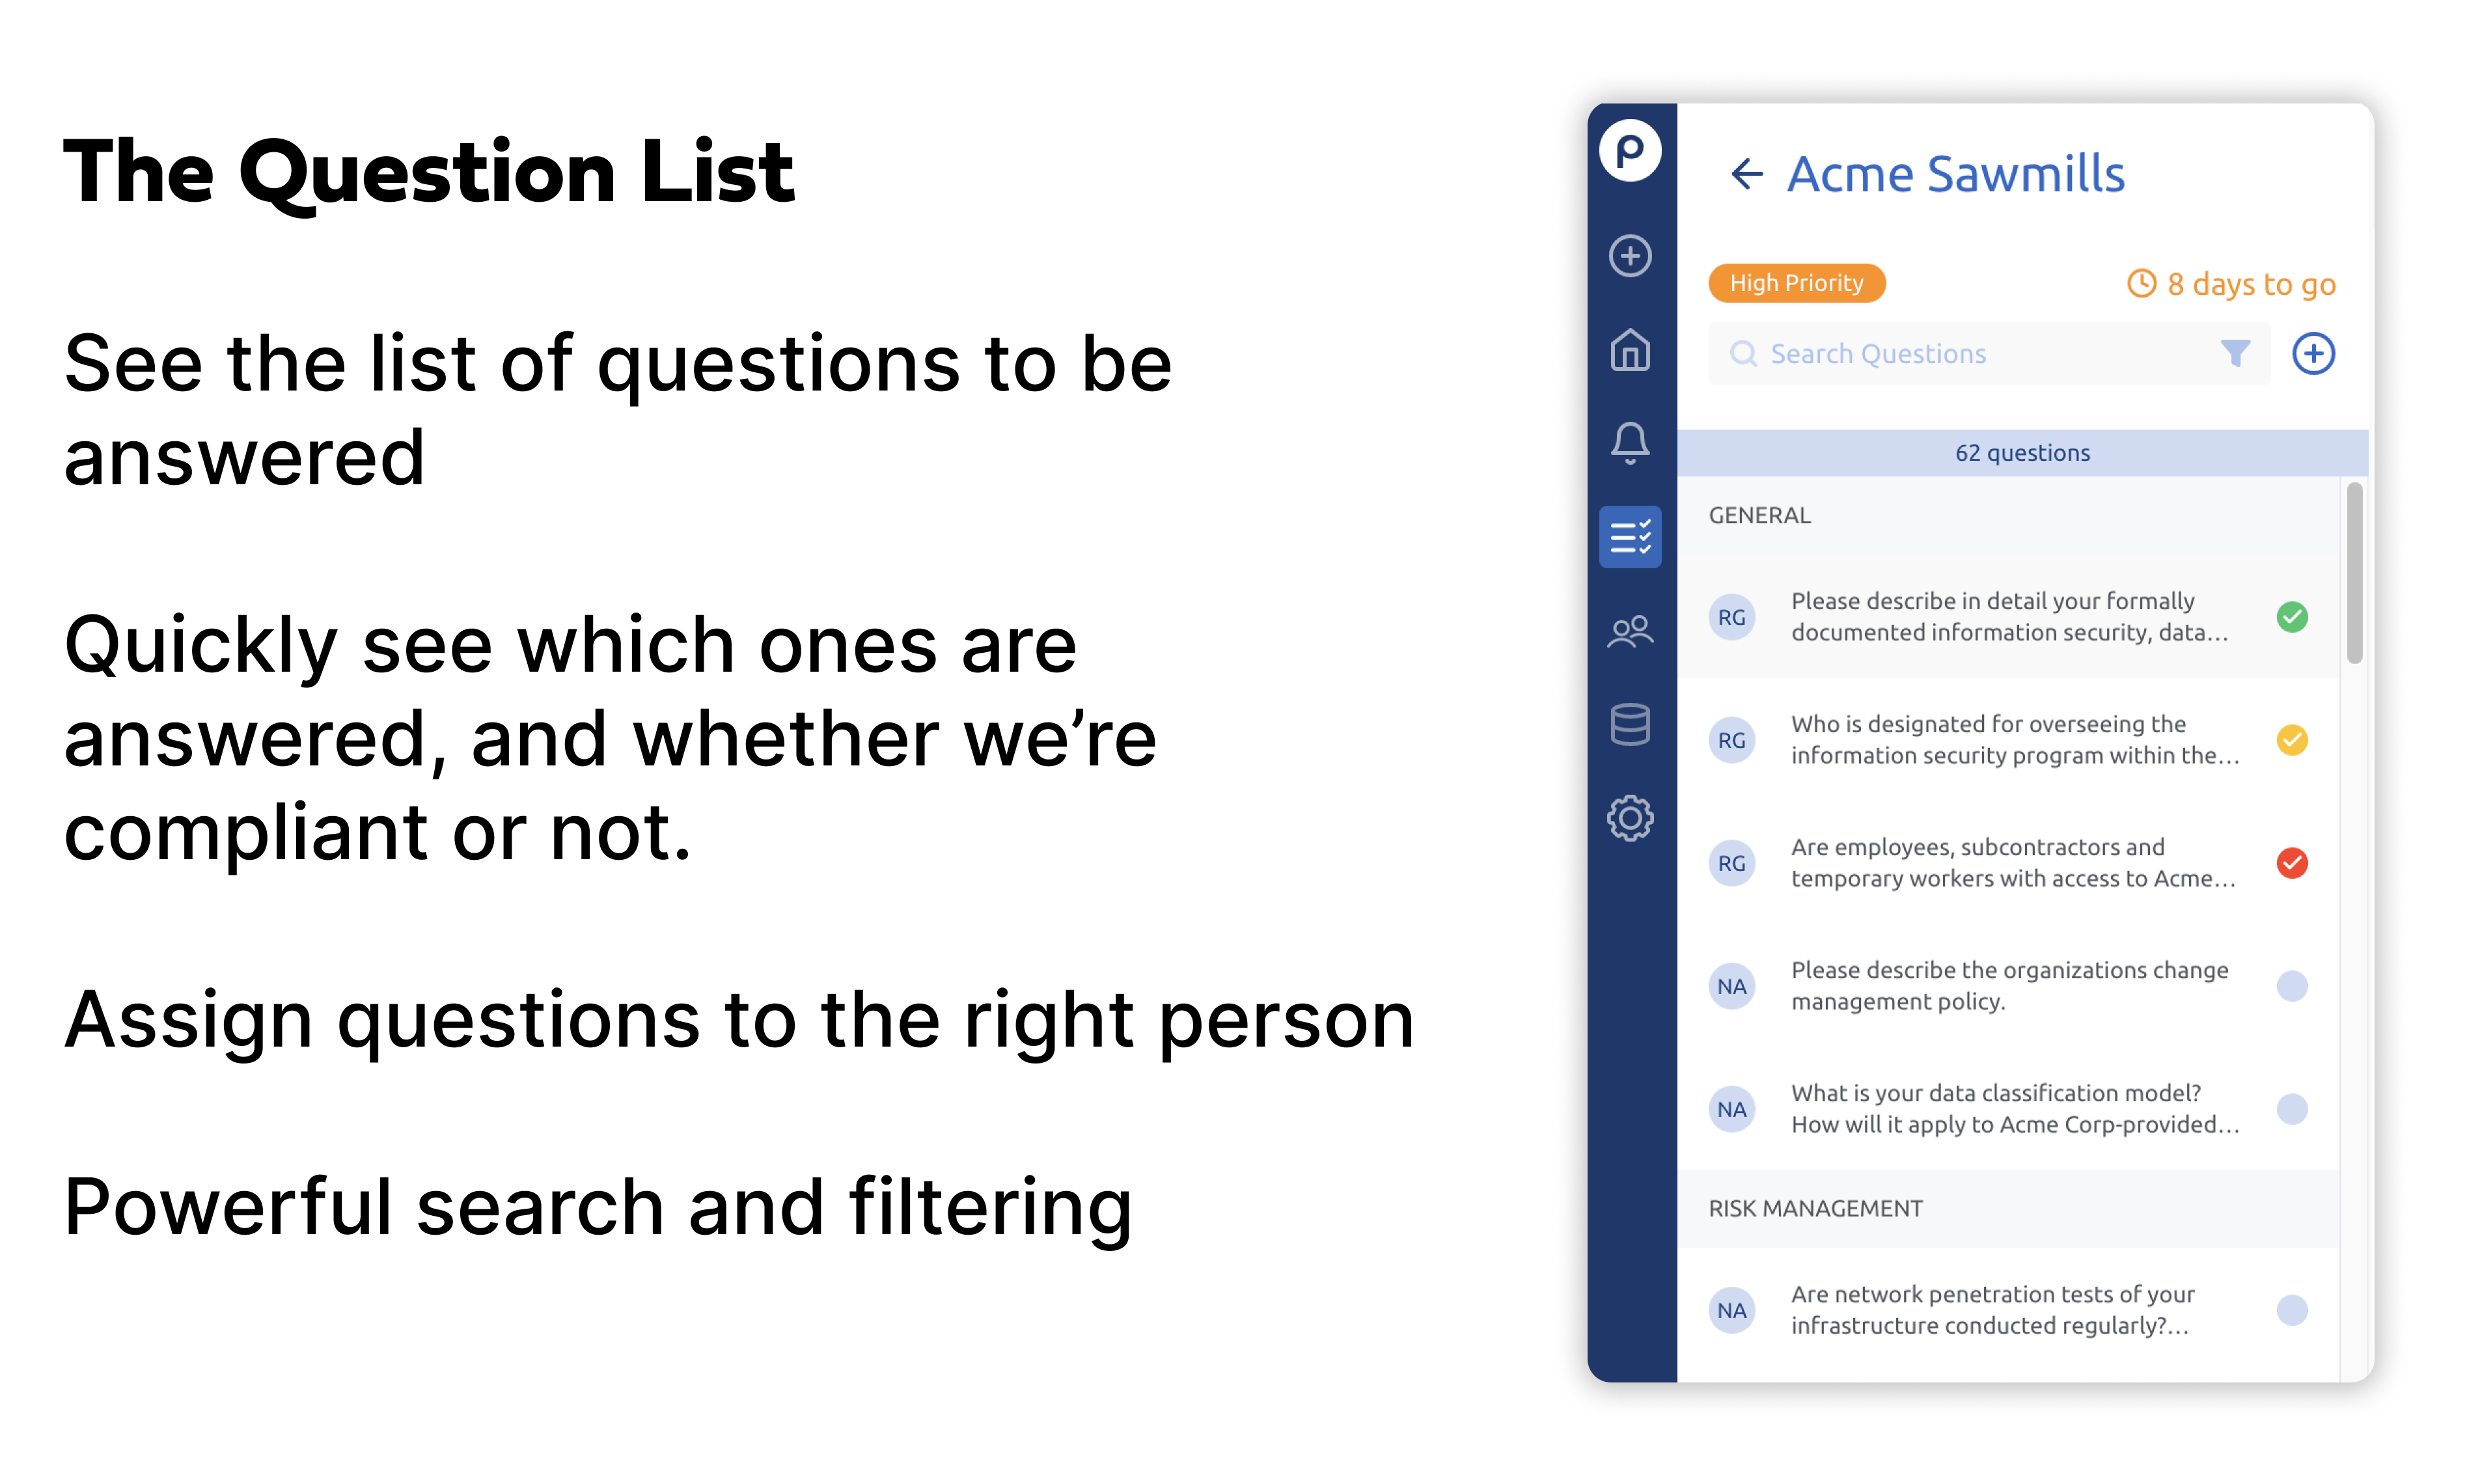 Simple navigation through questions, with question assignment, completion status and compliance status